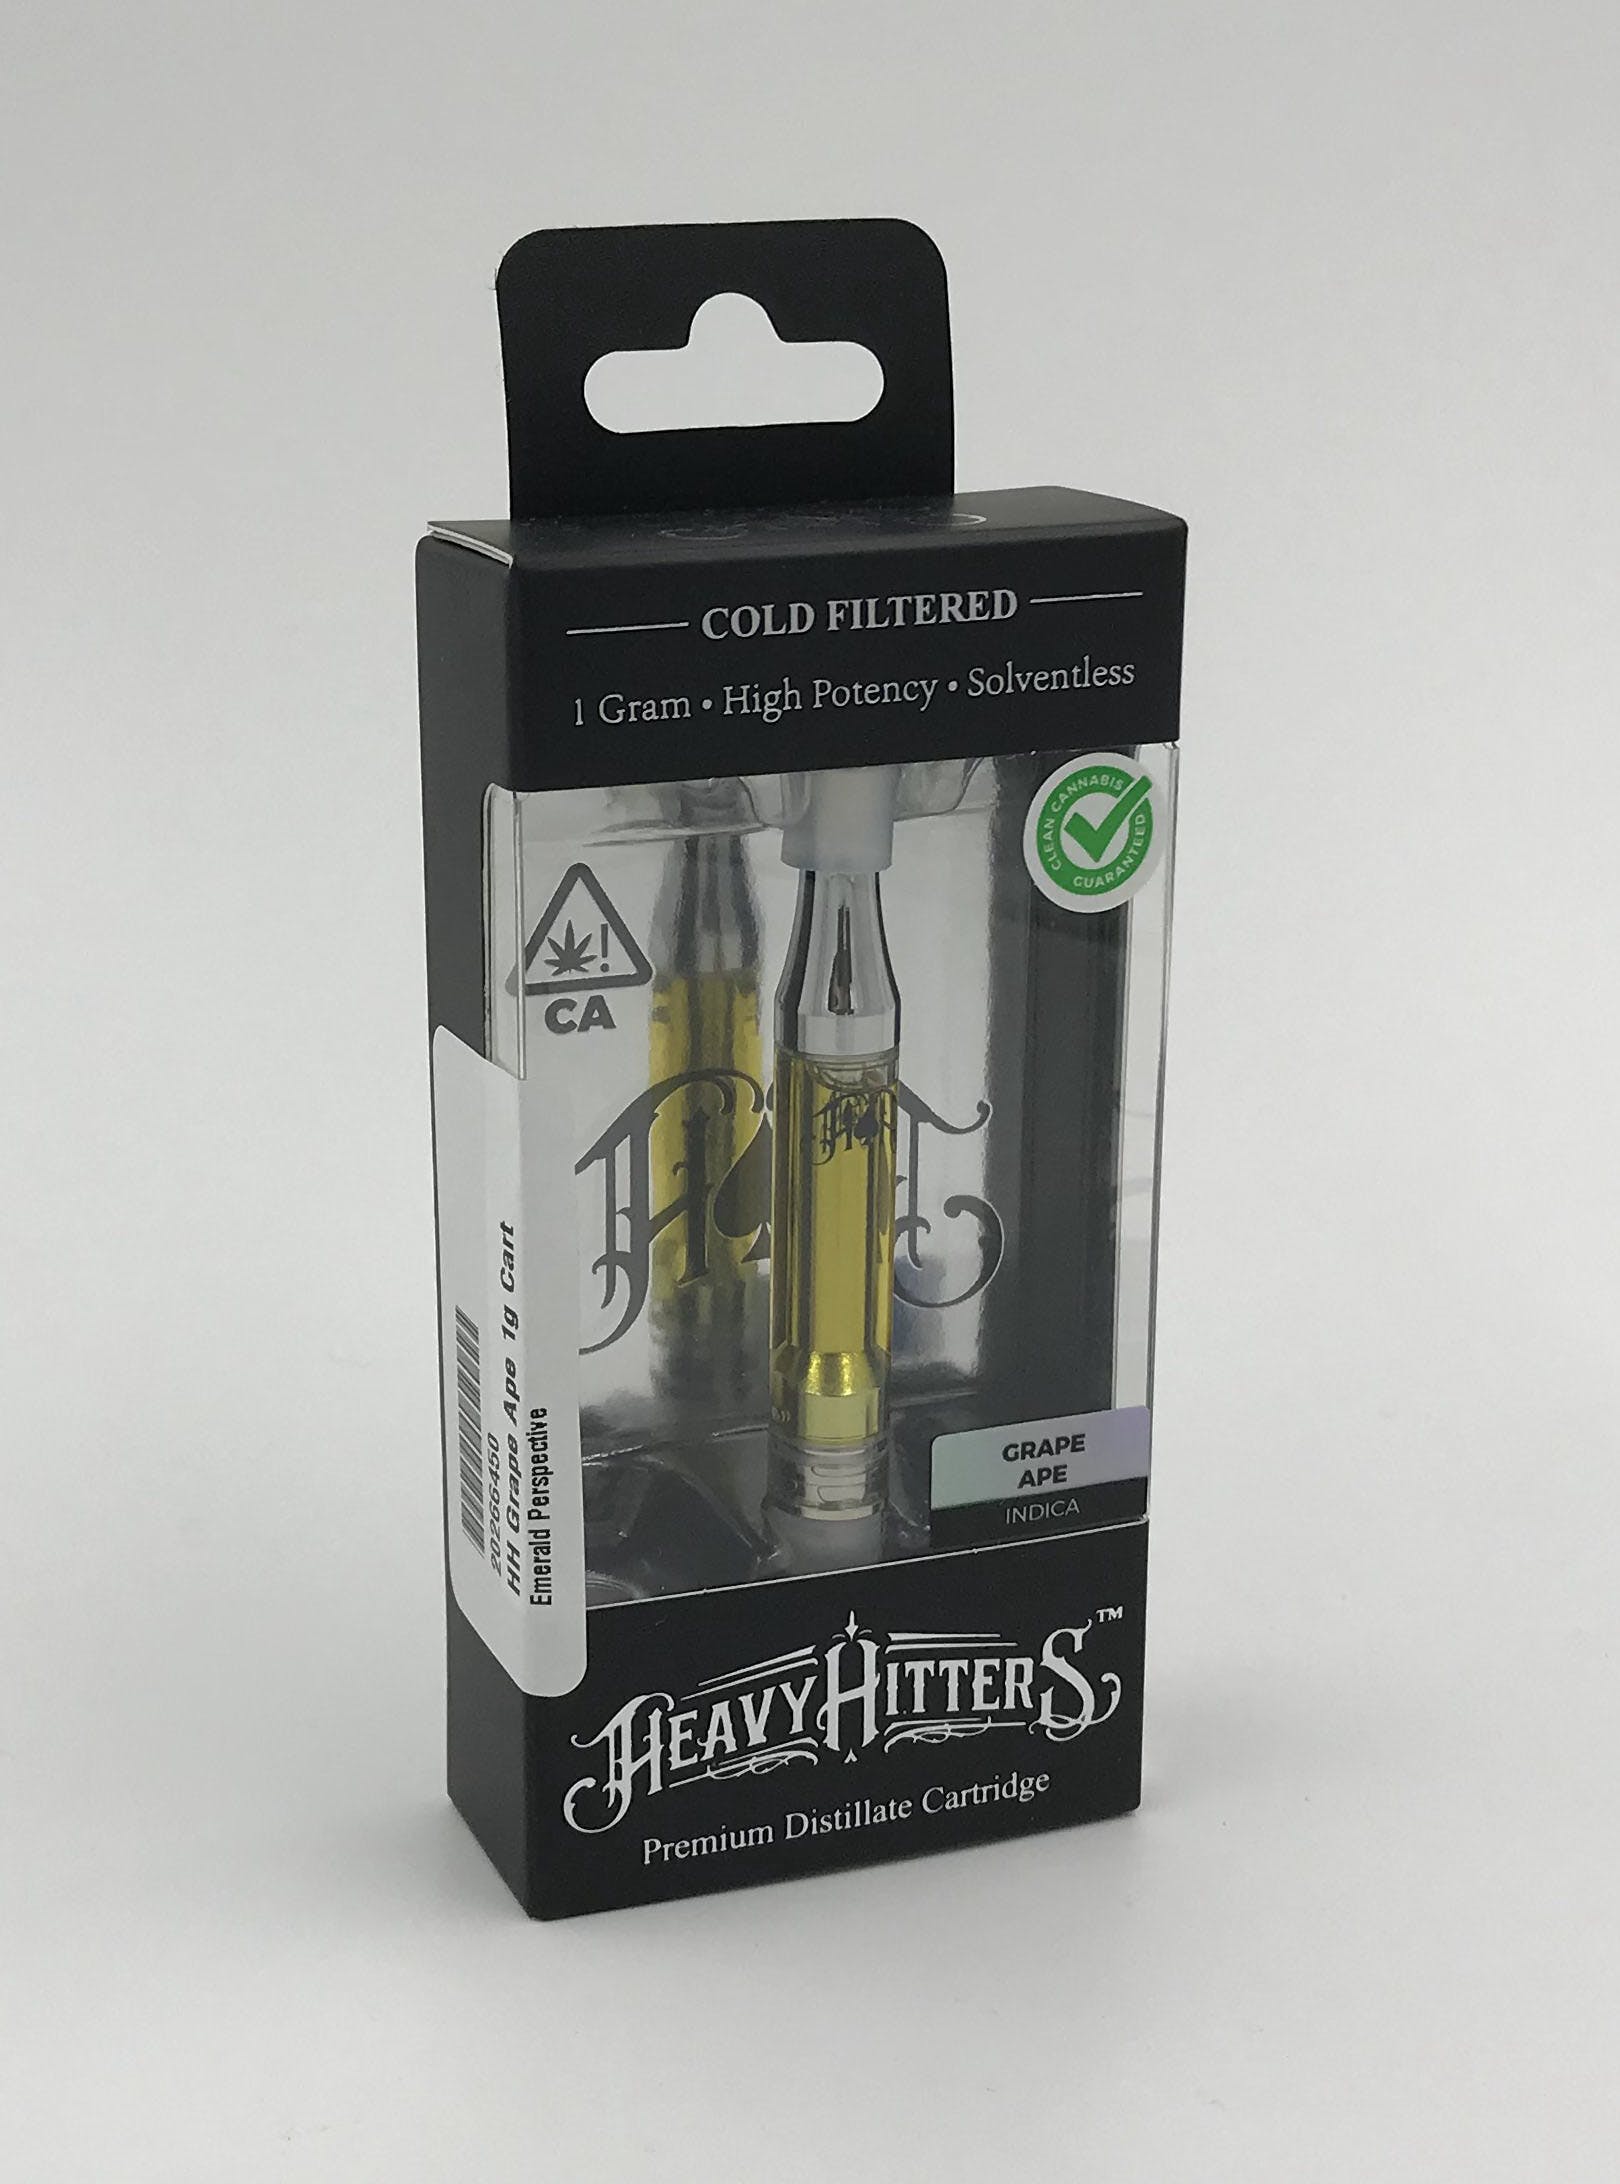 concentrate-heavy-hitters-grape-ape-cartridges-by-heavy-hitters